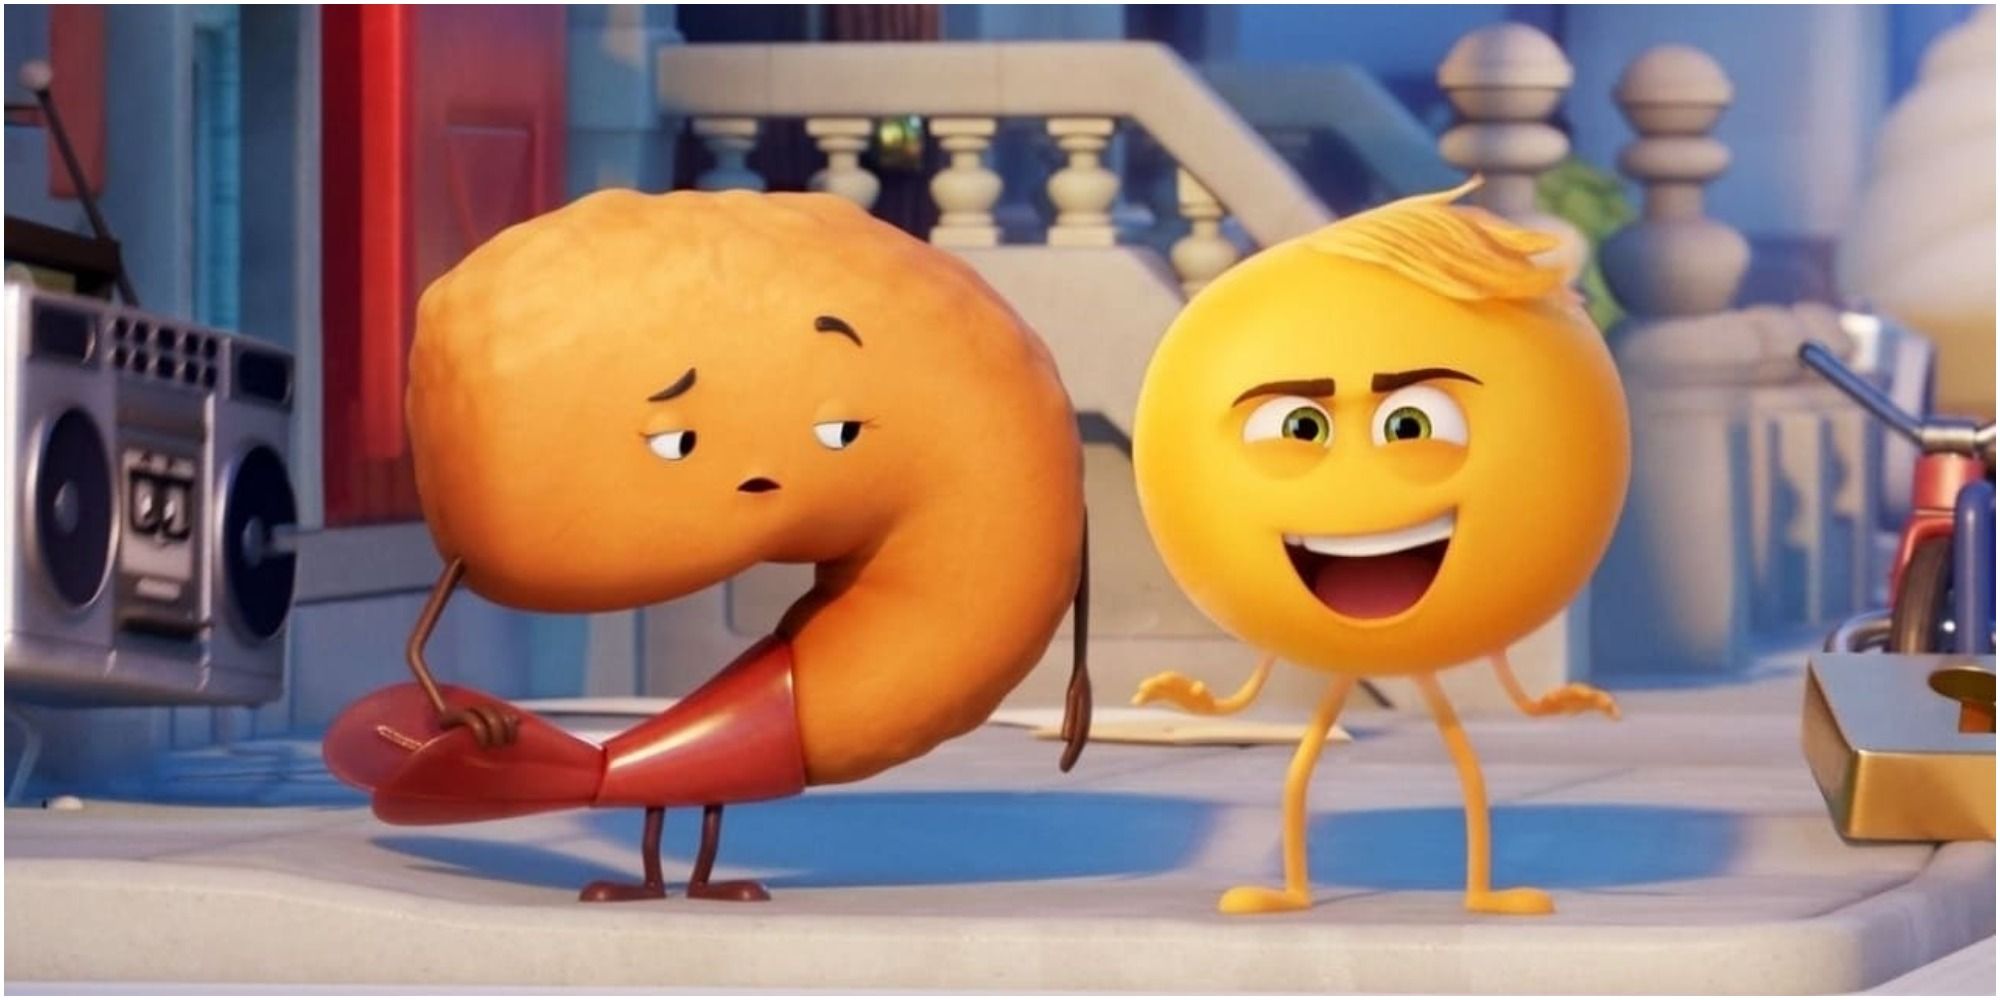 A shrimp and smiley in The Emoji Movie